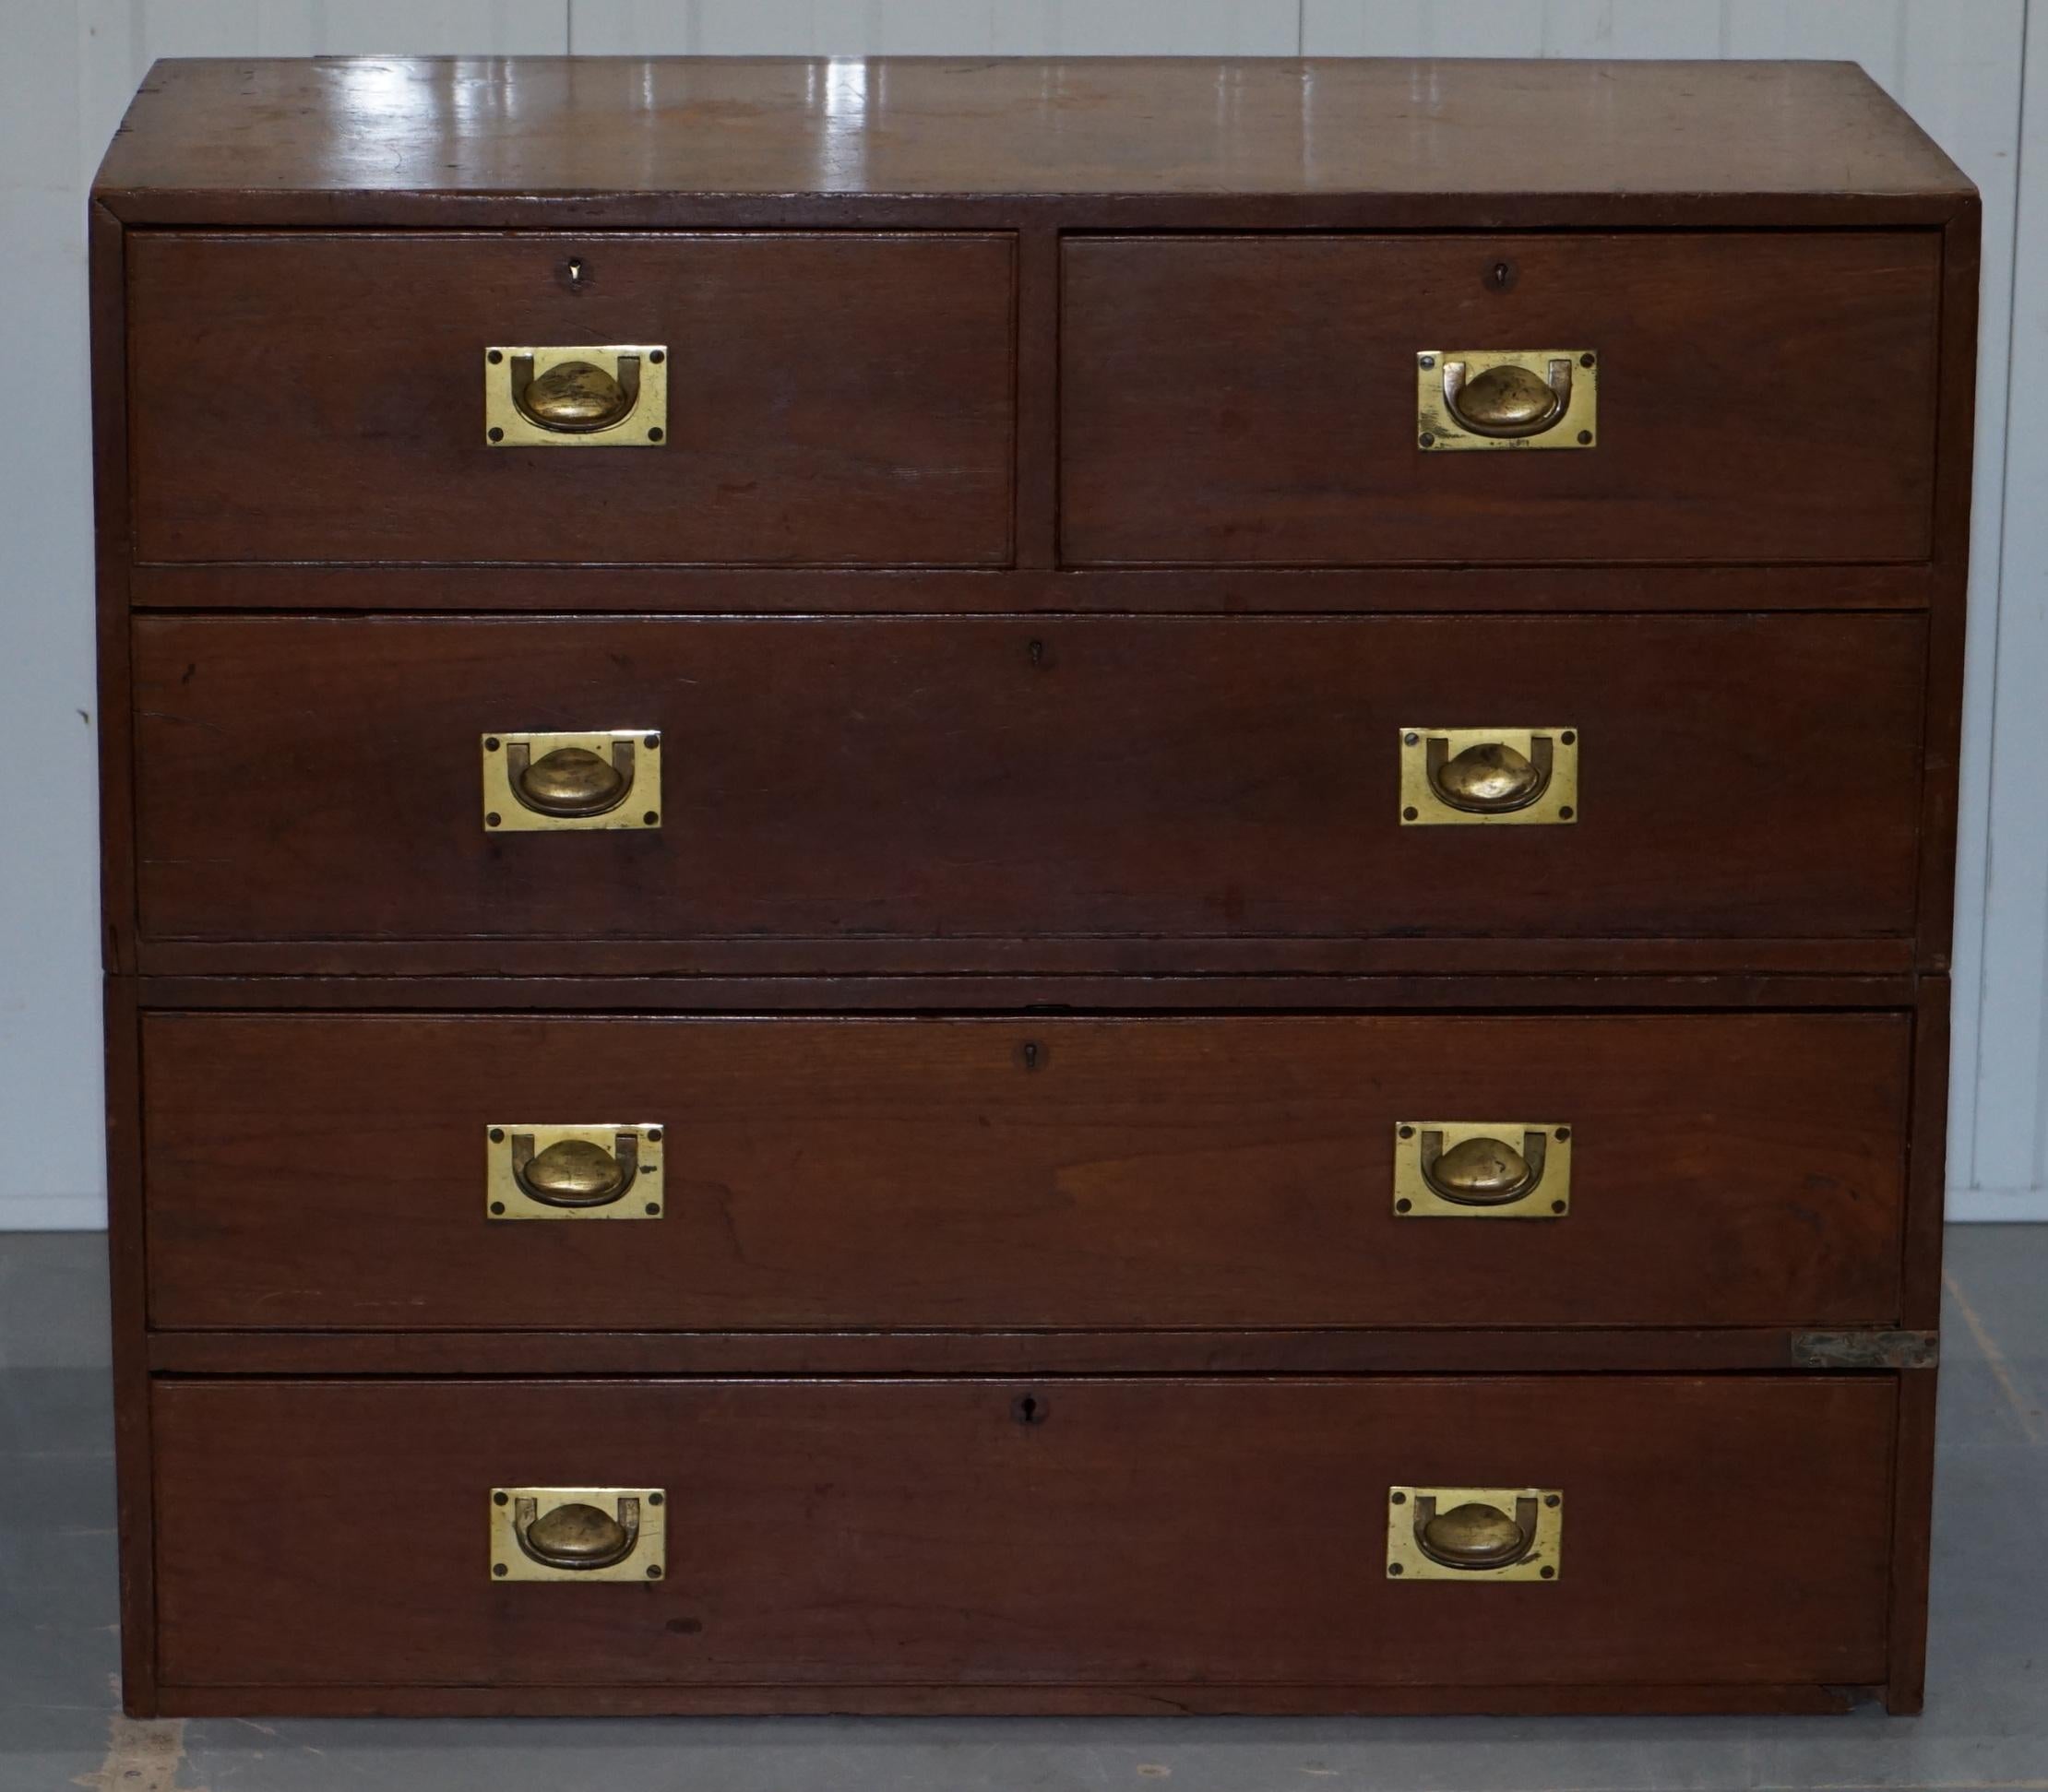 Royal House Antiques

Royal House Antiques is delighted to offer for sale this exceptionally rare, fully signed, 93rd Lancers (Regiment of Foot) military campaign chest of drawers circa 1850

Please note the delivery fee listed is just a guide, it